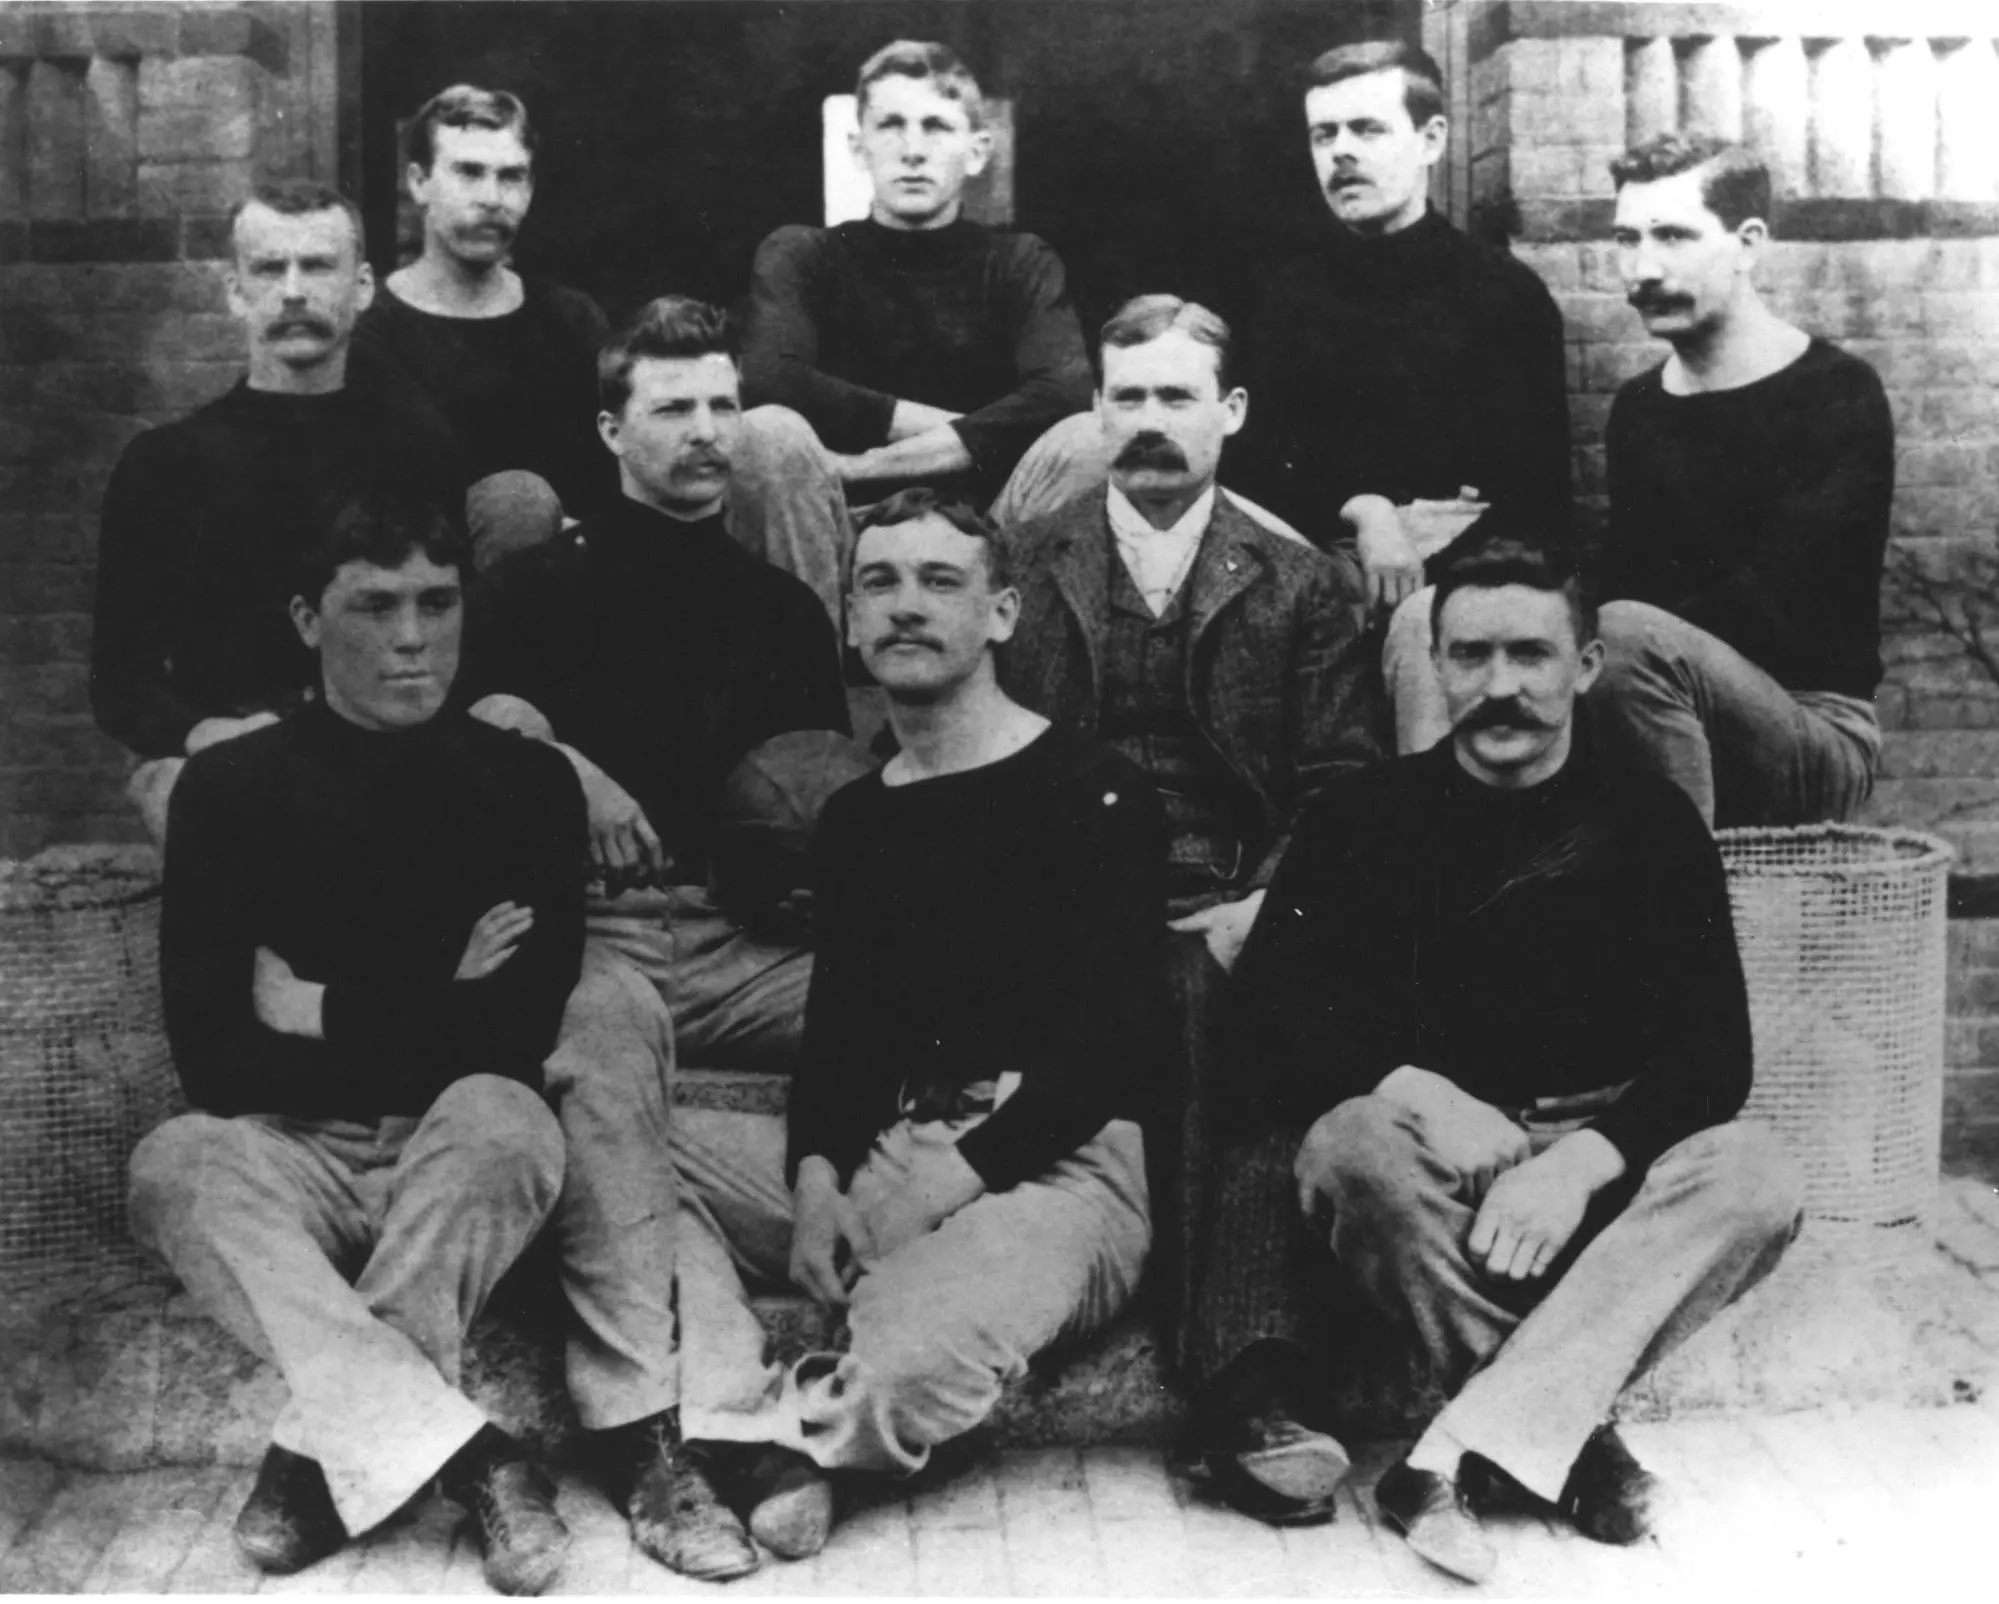 A group of men posing for a photo.